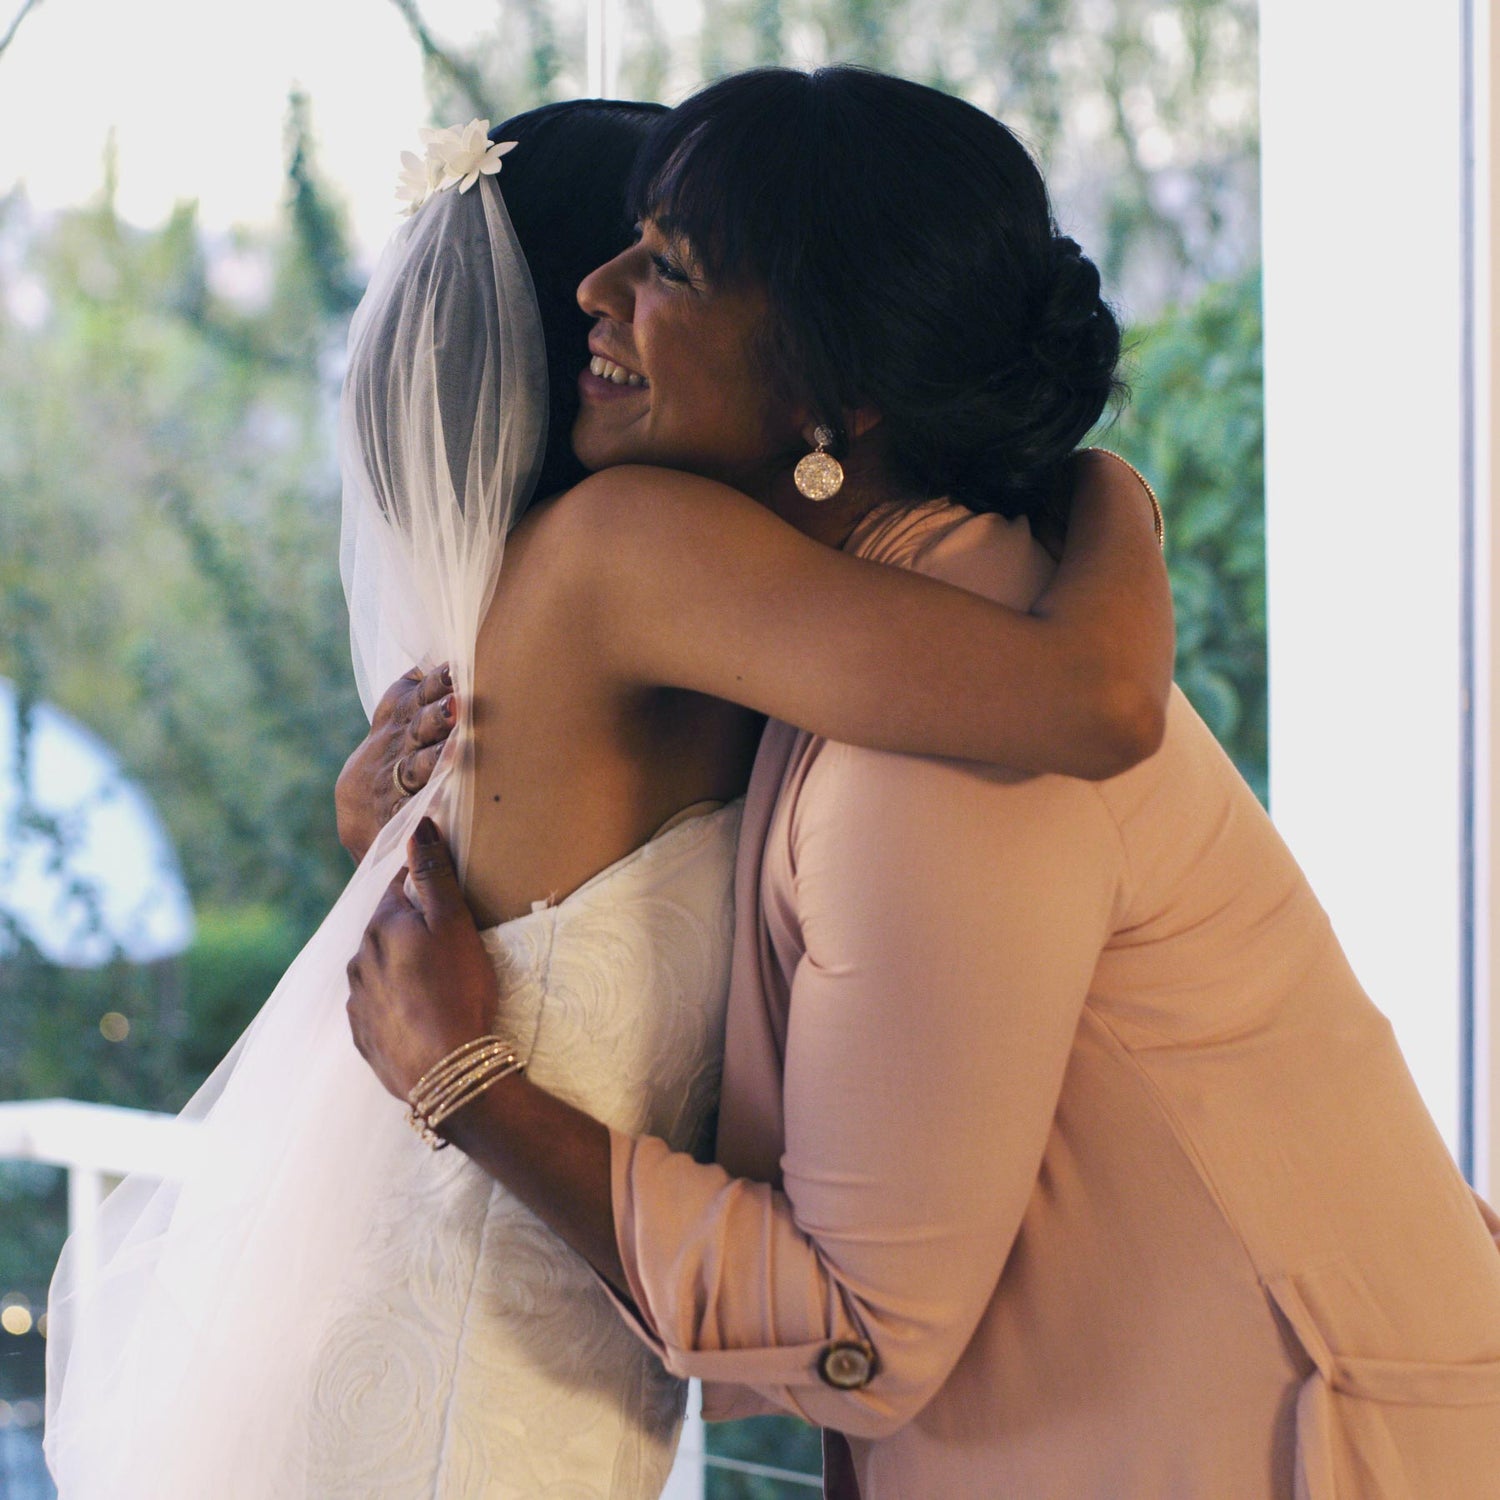 Daughter in a wedding dress and her mother hug before the wedding.